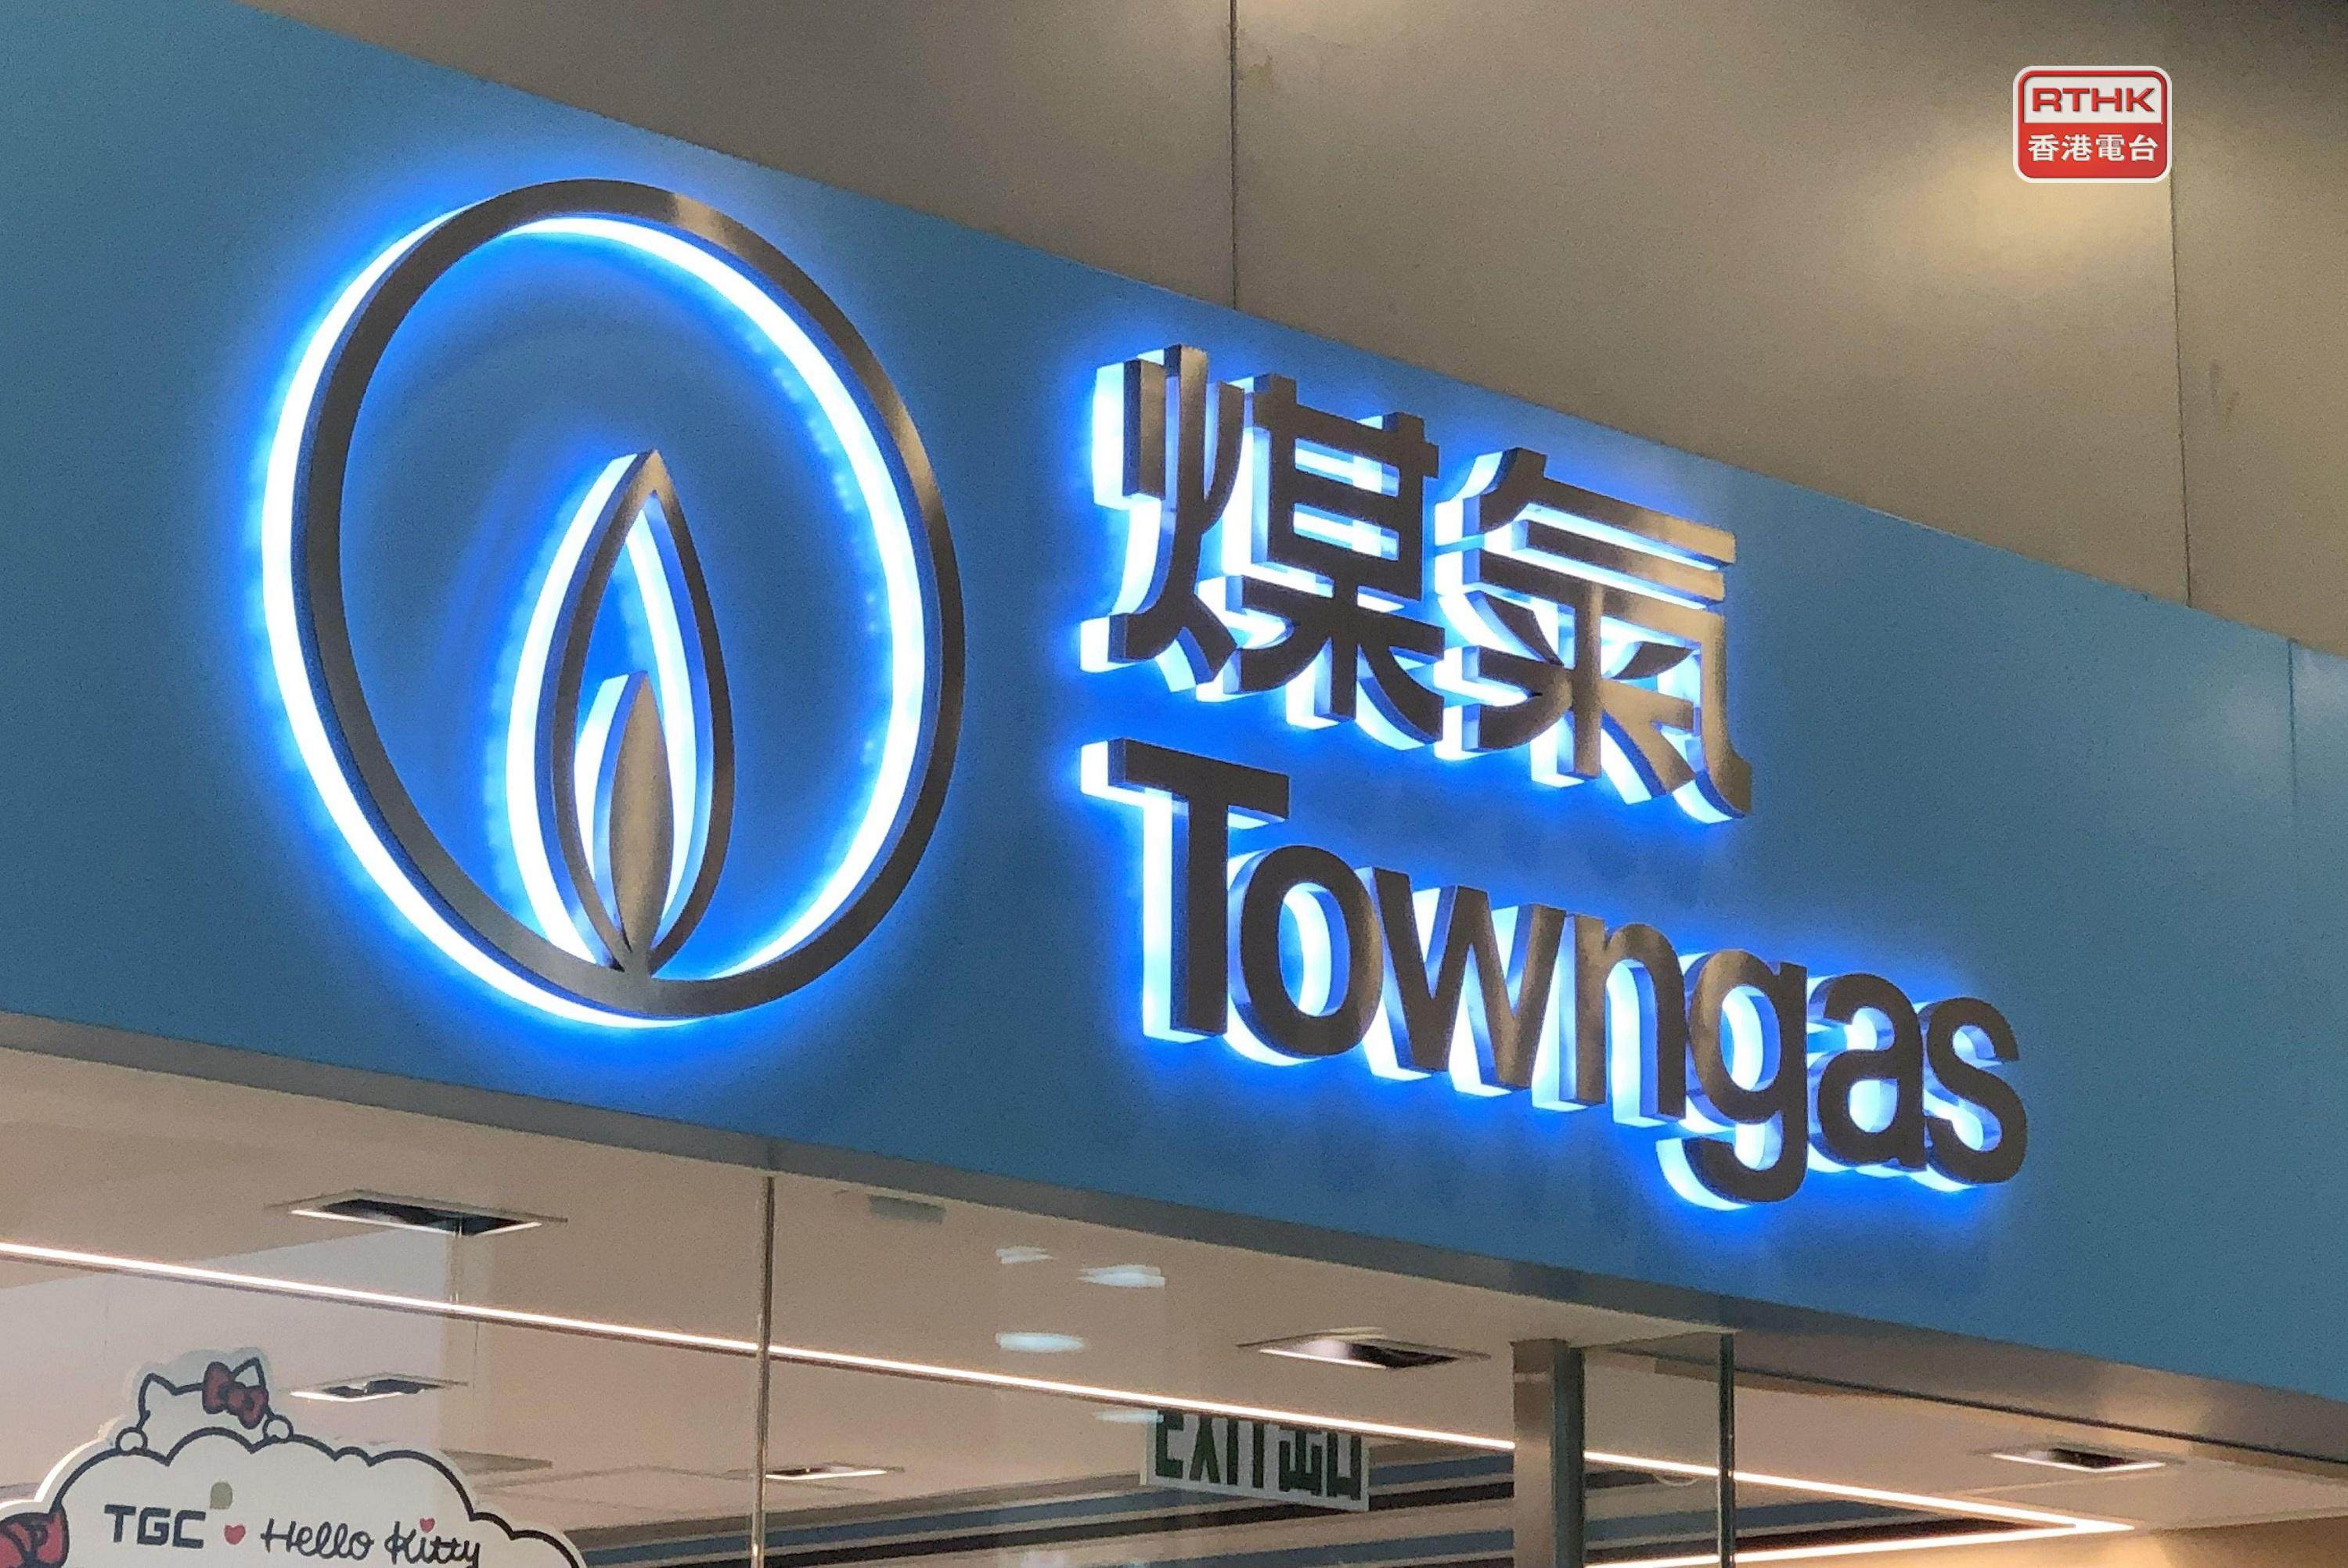 Piped-gas provider Towngas’ sales in Hong Kong fell 1 per cent last year because of above-average temperatures and reduced use. Photo: Handout